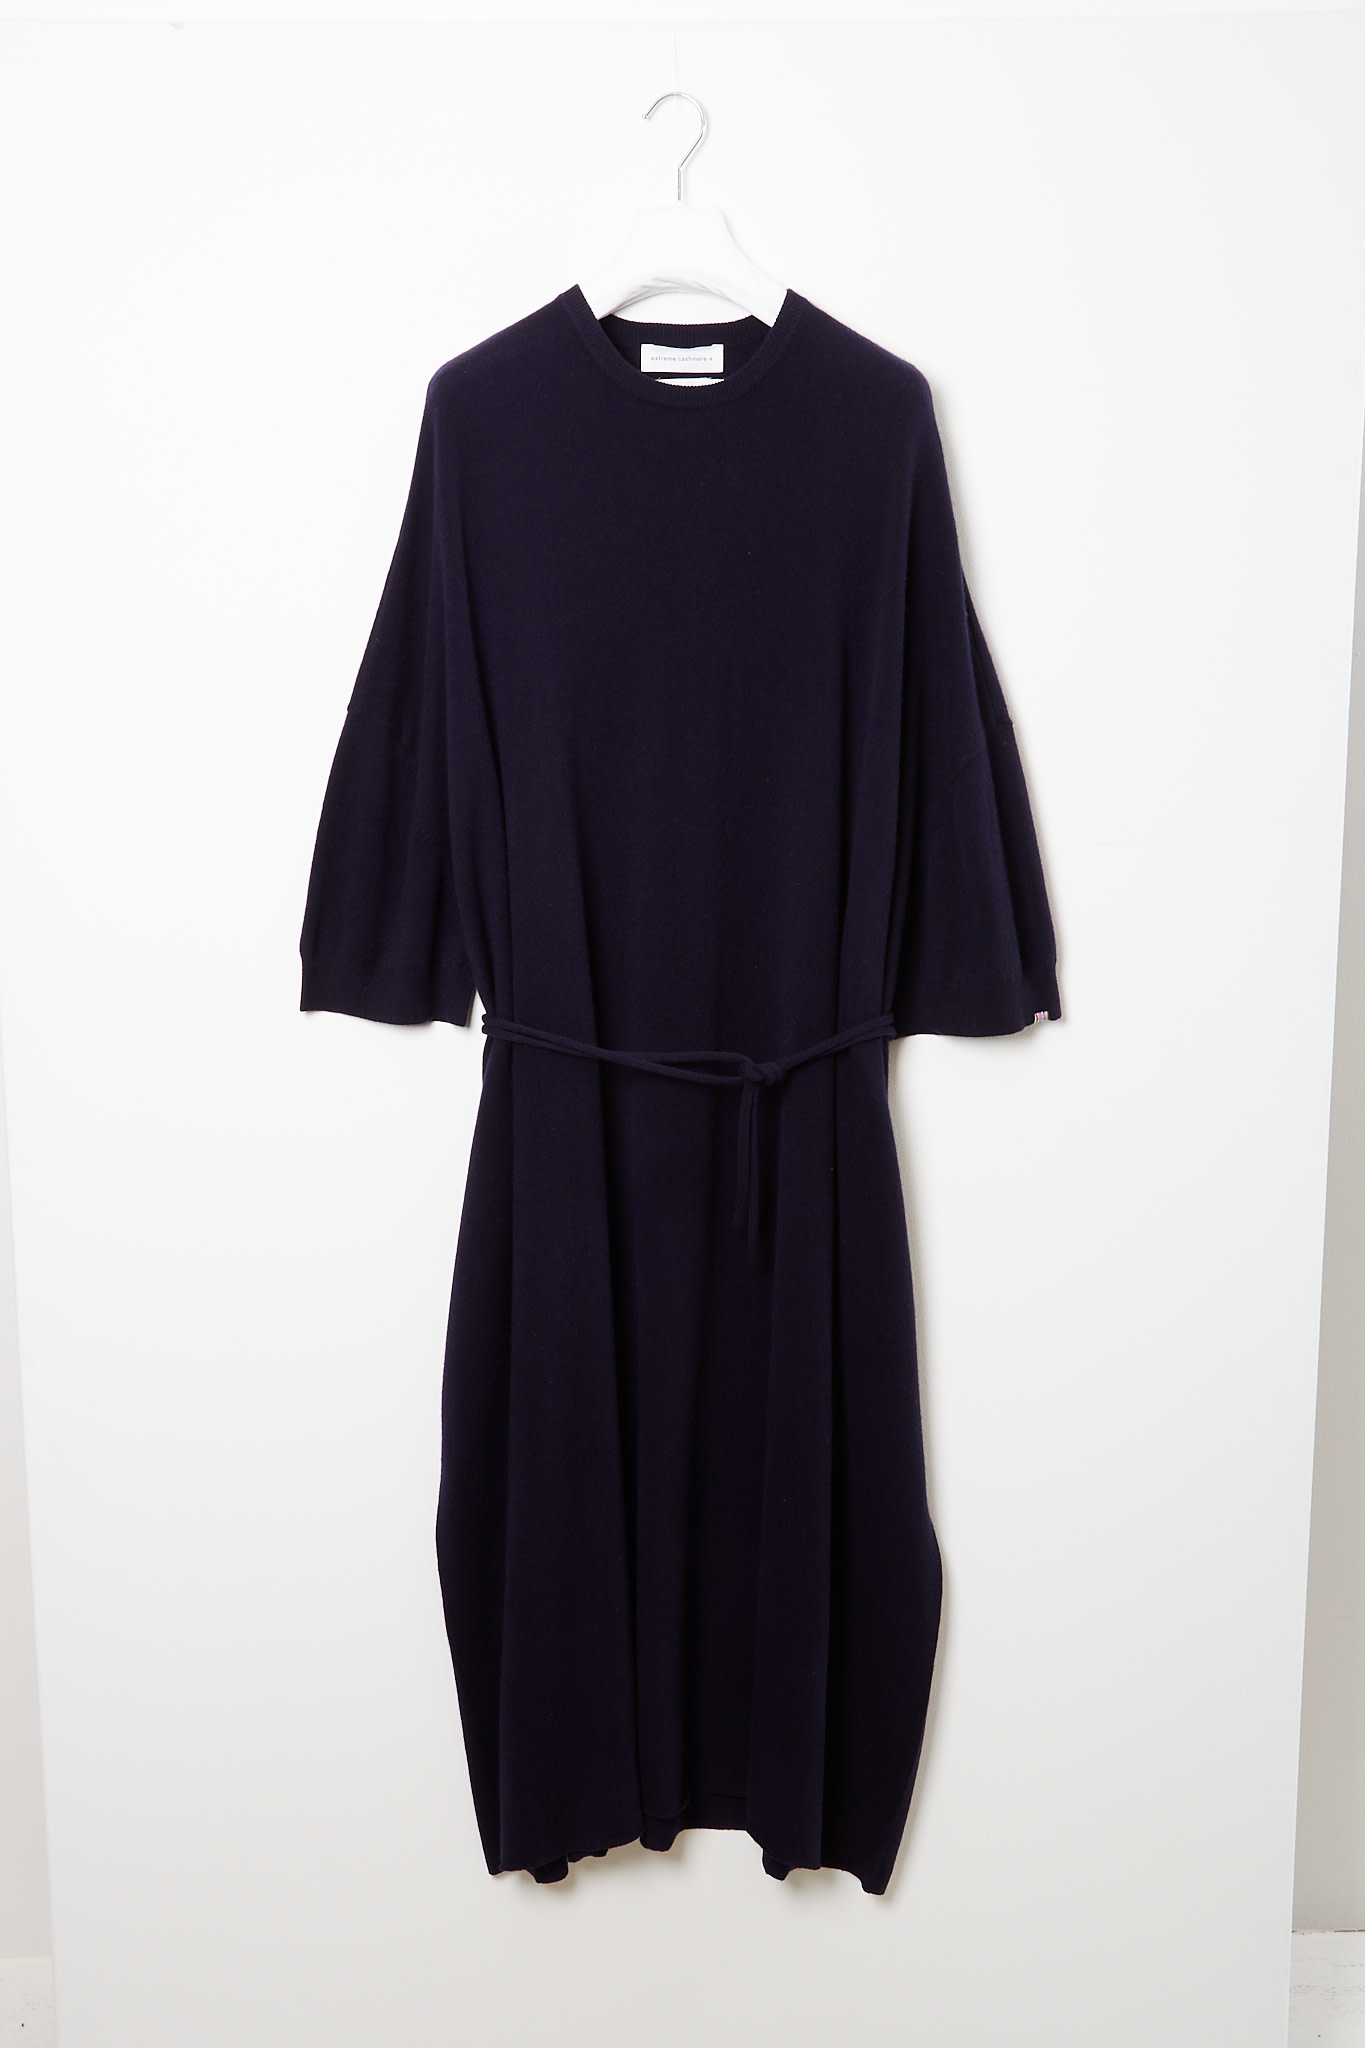 extreme cashmere - Ghost dress